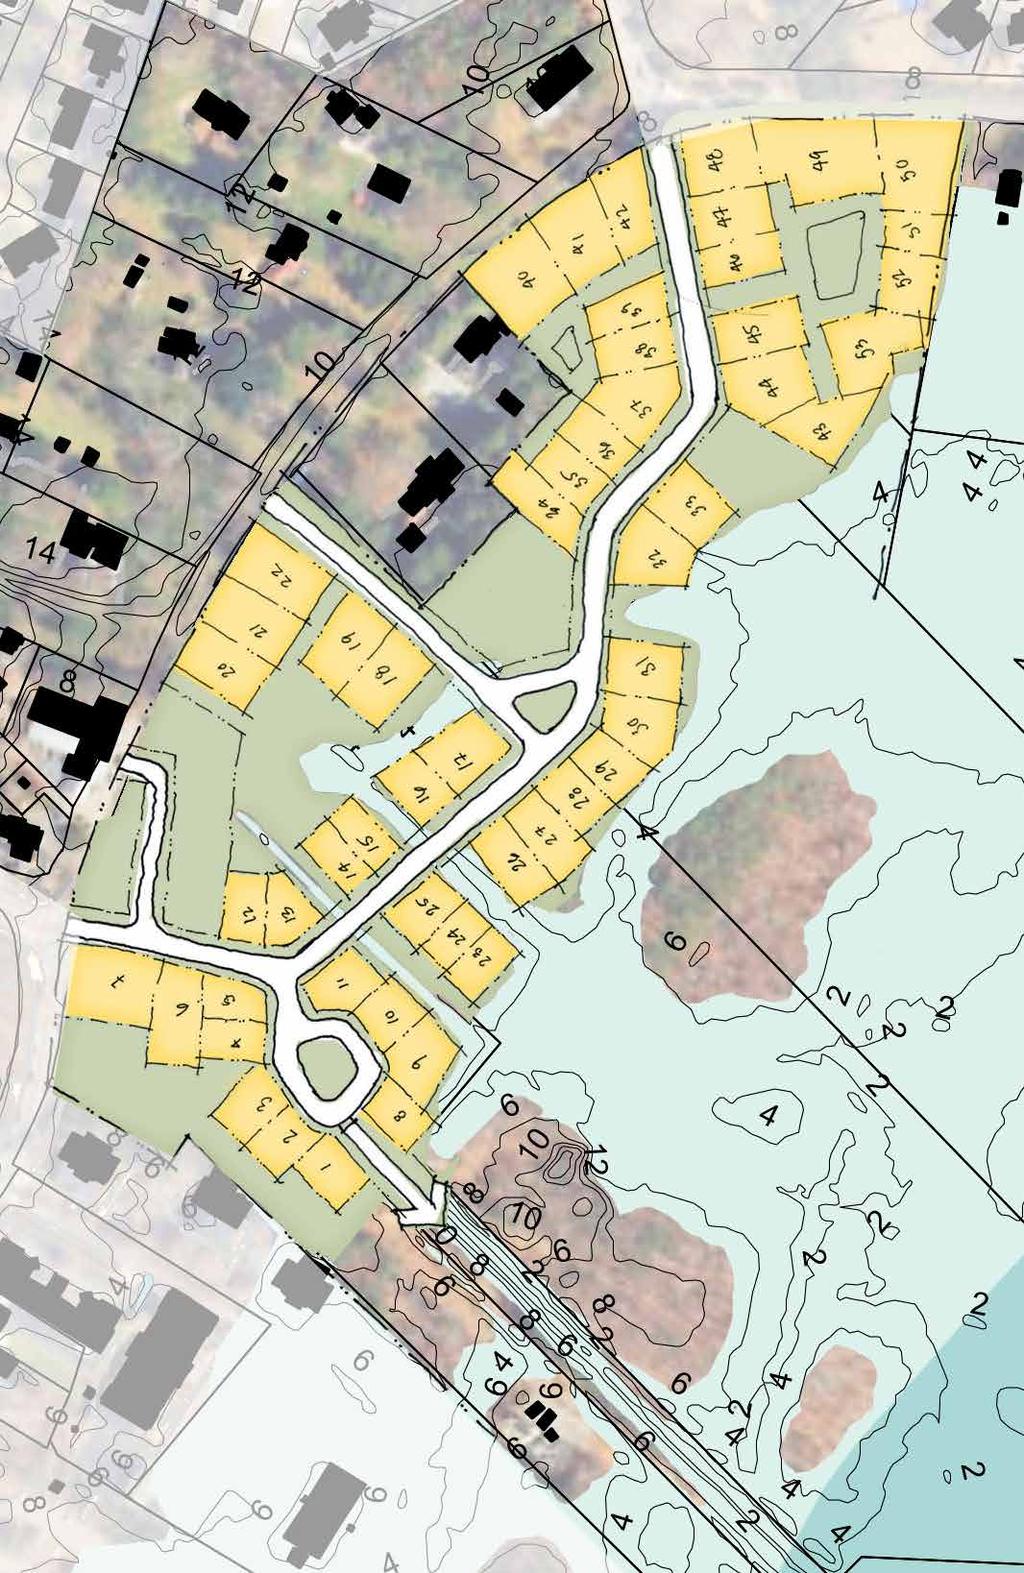 JUSTIFICATION FOR DIFFERENT ZONE 1/2 mile radius from Courthouse (10-minute walk) In the Vicinity of the ITA plan (and therefore influenced by recommendations in Comprehensive Plan) DEVELOPMENT